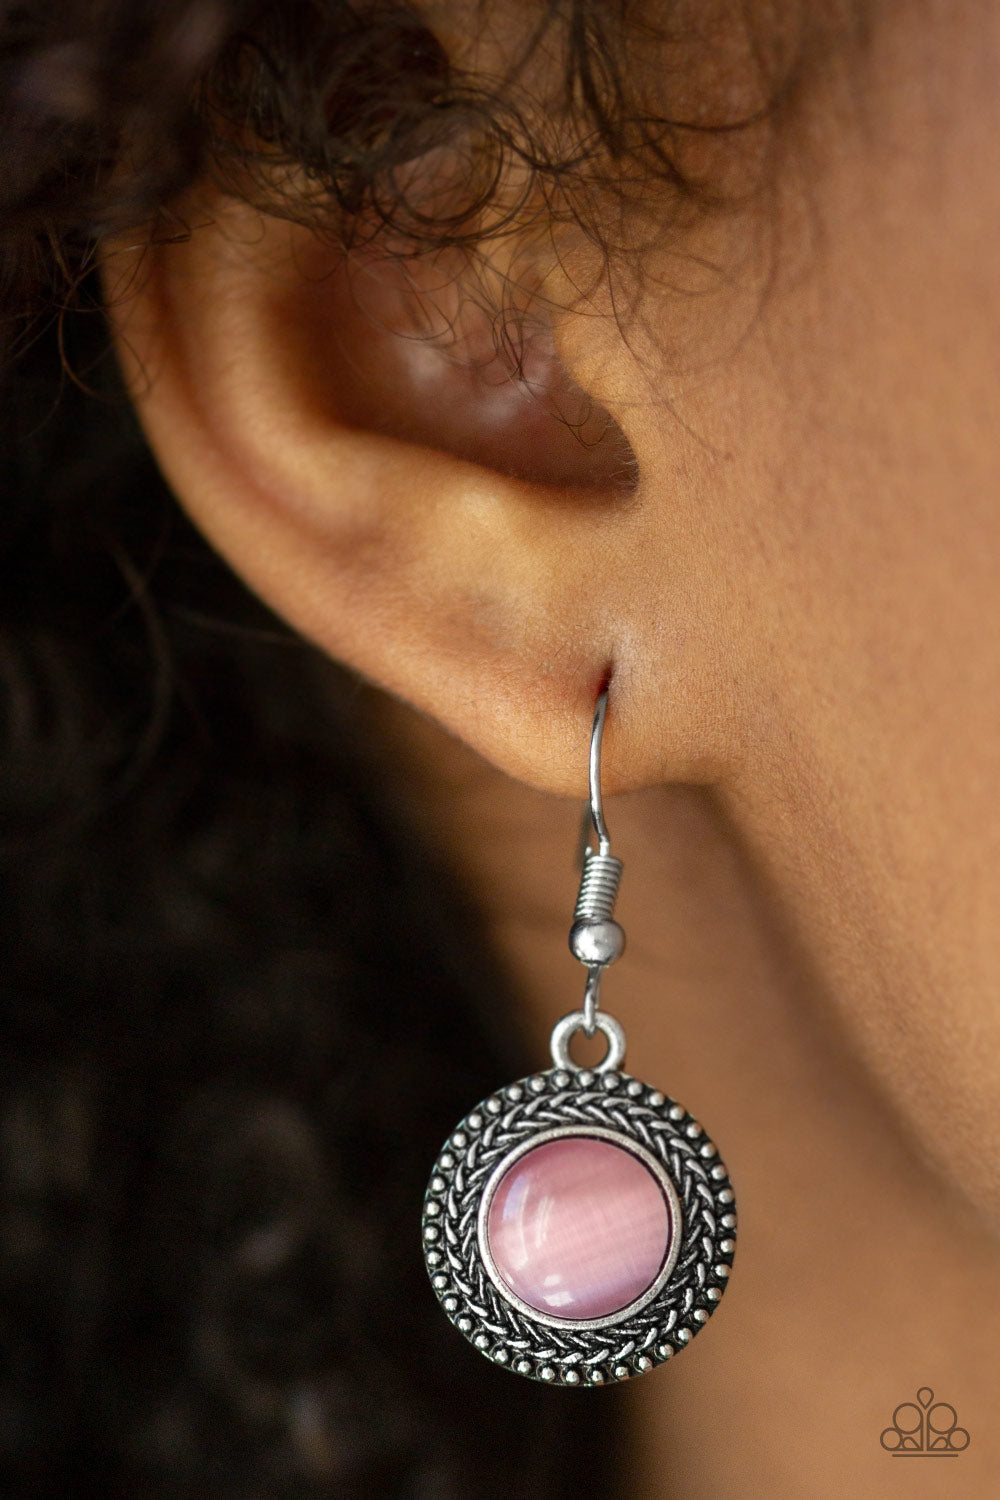 Paparazzi Time To GLOW Up! - Pink Moonstone - Earrings - $5 Jewelry With Ashley Swint